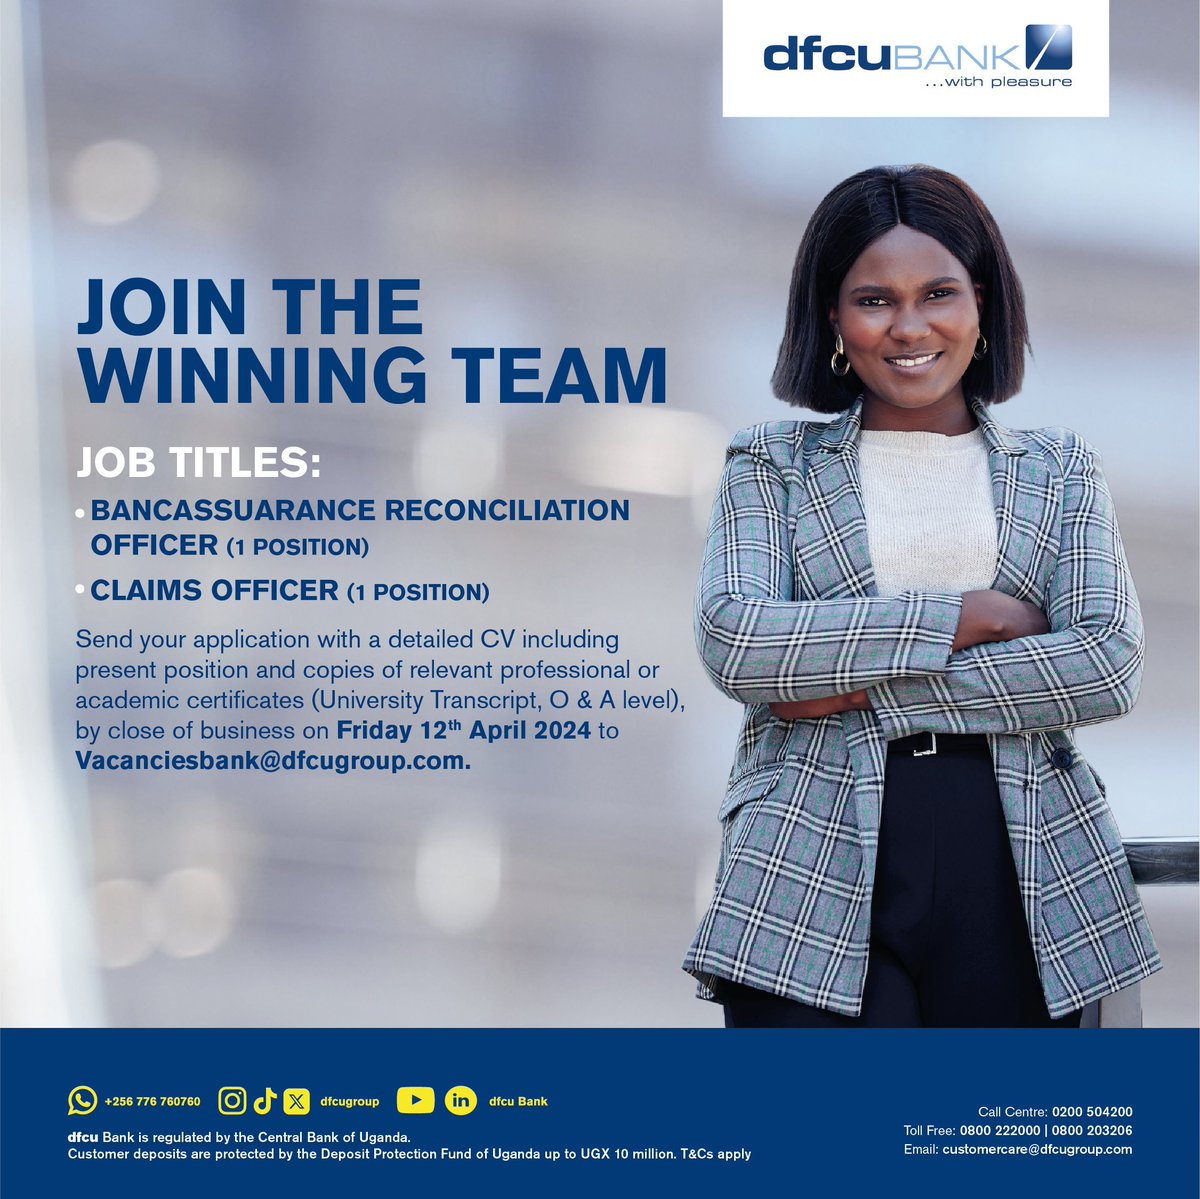 JOB OPPORTUNITY📢

@dfcugroup is currently hiring a Bancassurance reconciliation officer to join its team.

#jobclinicug #jobs #ApplyNow #careers #jobsinuganda #hiring #jobseekers #hiring